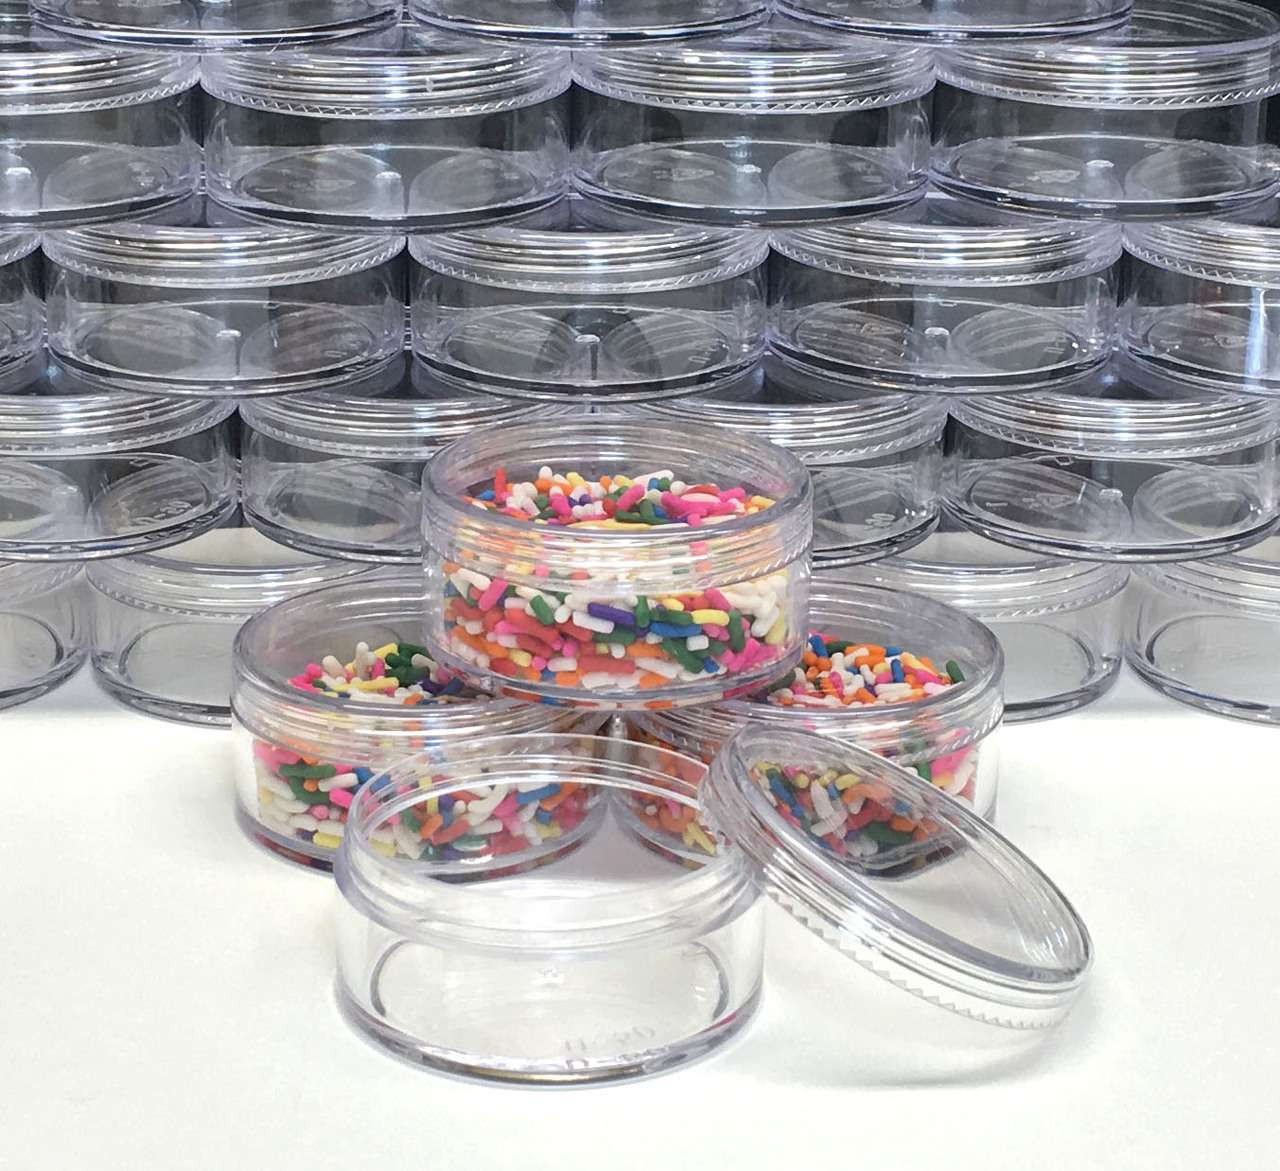 https://cdn11.bigcommerce.com/s-qd7k5gxi/images/stencil/1280x1280/products/470/7083/Cosmetic-Jars-Plastic-Beauty-Containers-50-Gram-Clear-Cap-3057-Beauty-Makeup-Supply_3321__33151.1661390691.jpg?c=2?imbypass=on